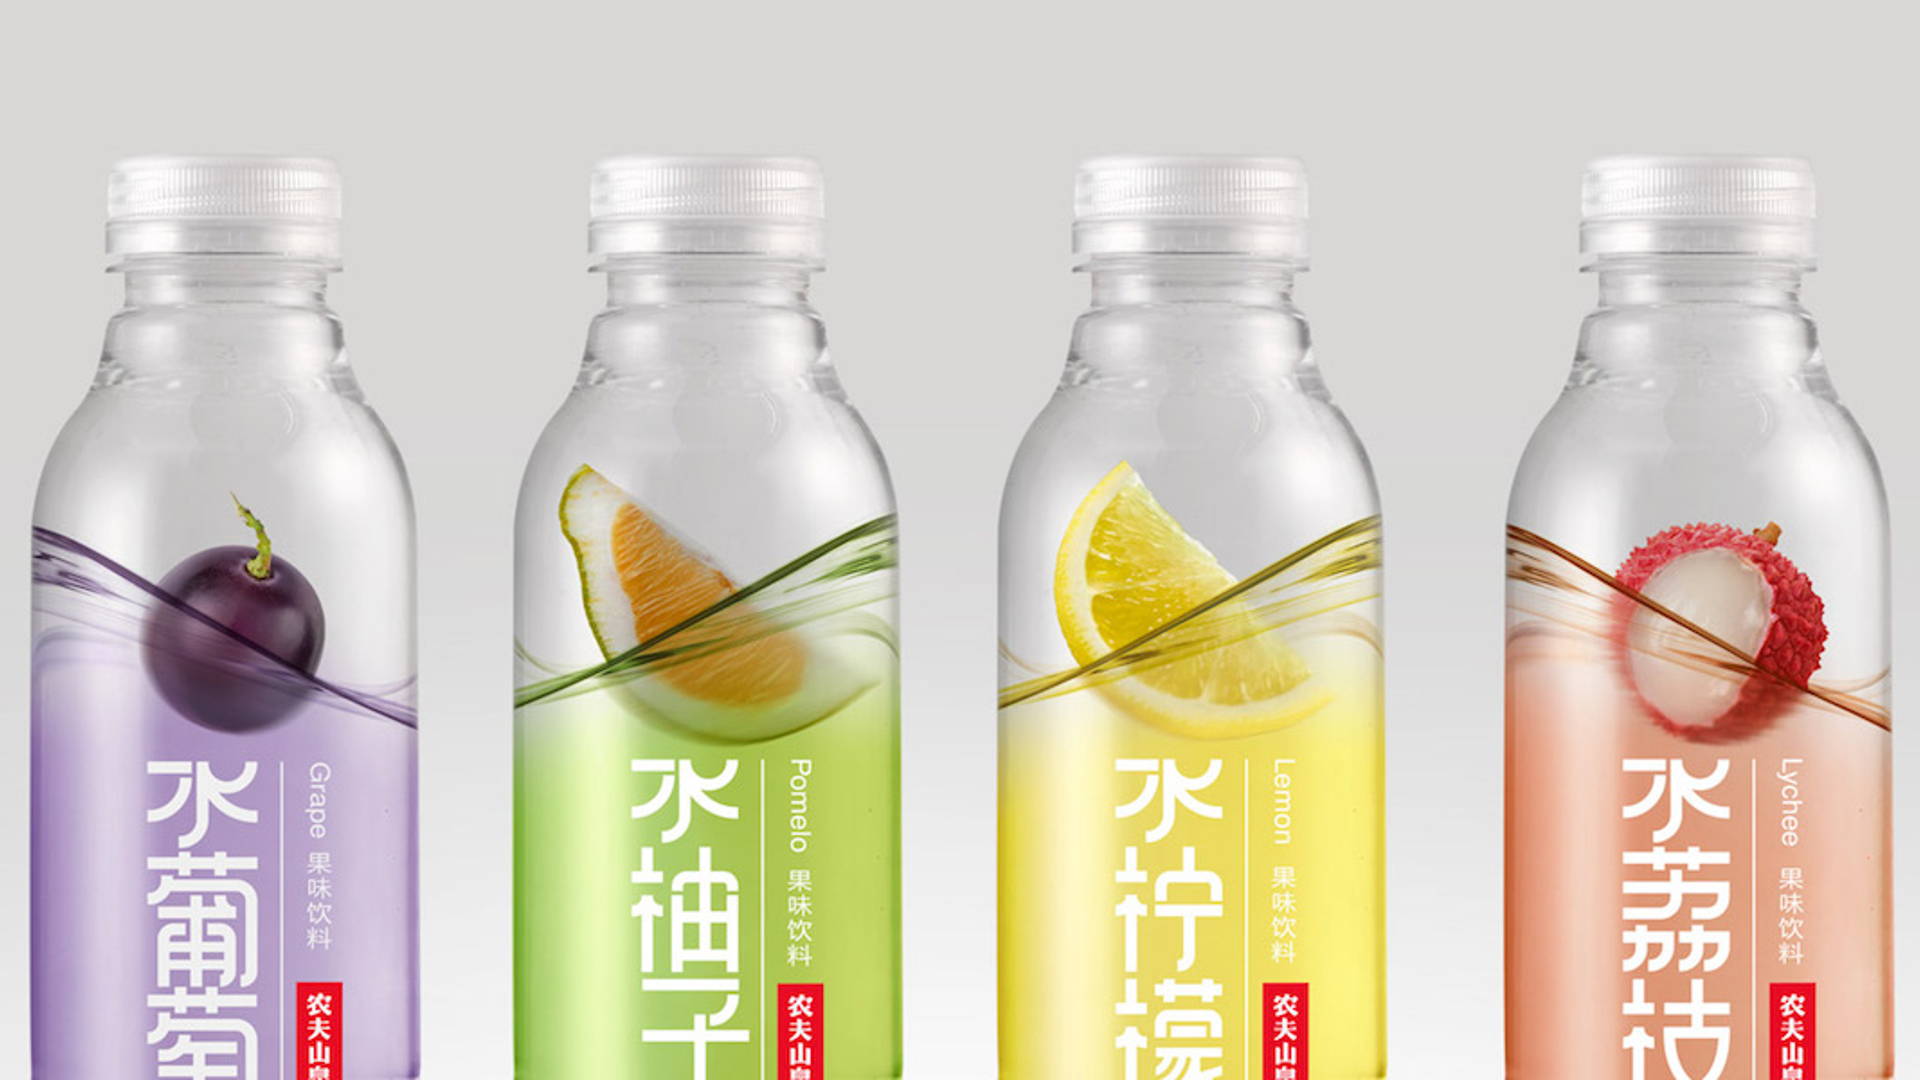 Featured image for Nongfu Spring Flavored Water